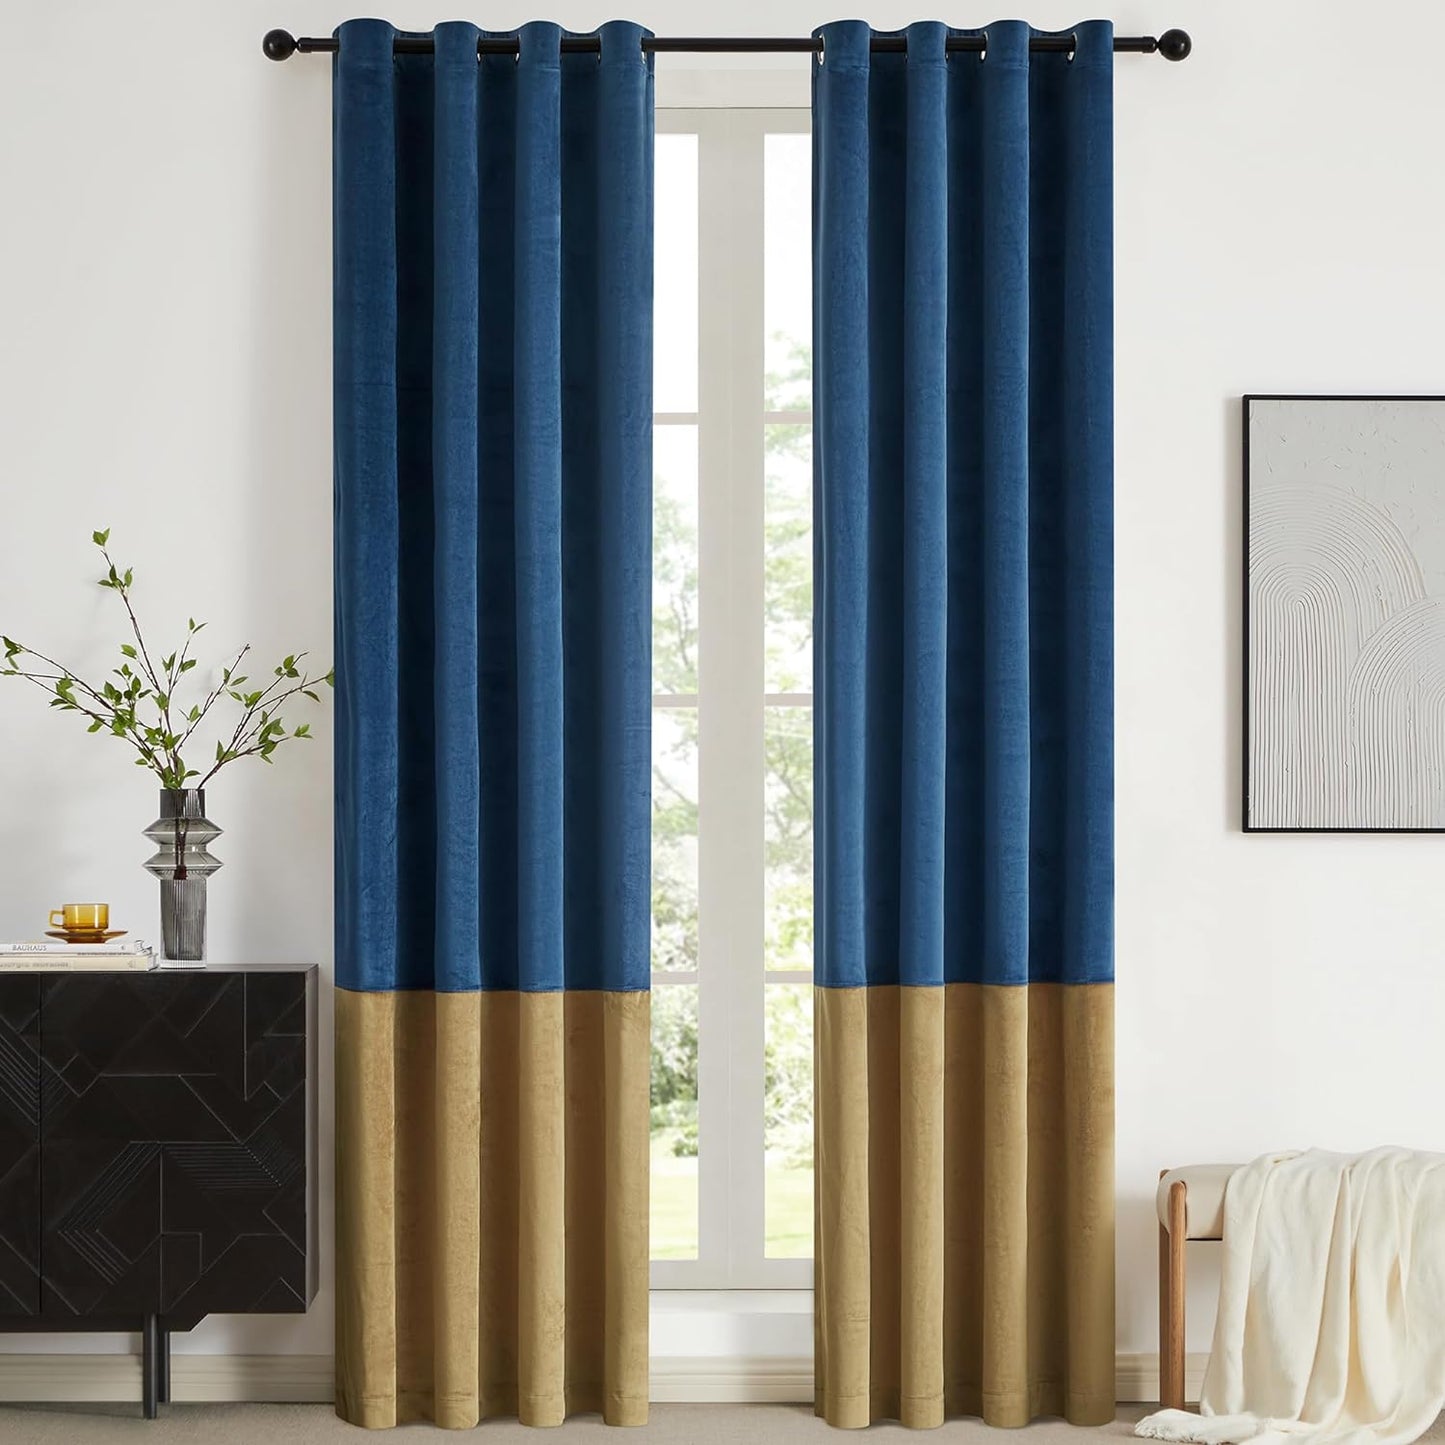 BULBUL Color Block Window Curtains Panels 84 Inches Long Cream Ivory Gold Velvet Farmhouse Drapes for Bedroom Living Room Darkening Treatment with Grommet Set of 2  BULBUL Navy Blue  Gold 52"W X 84"L 